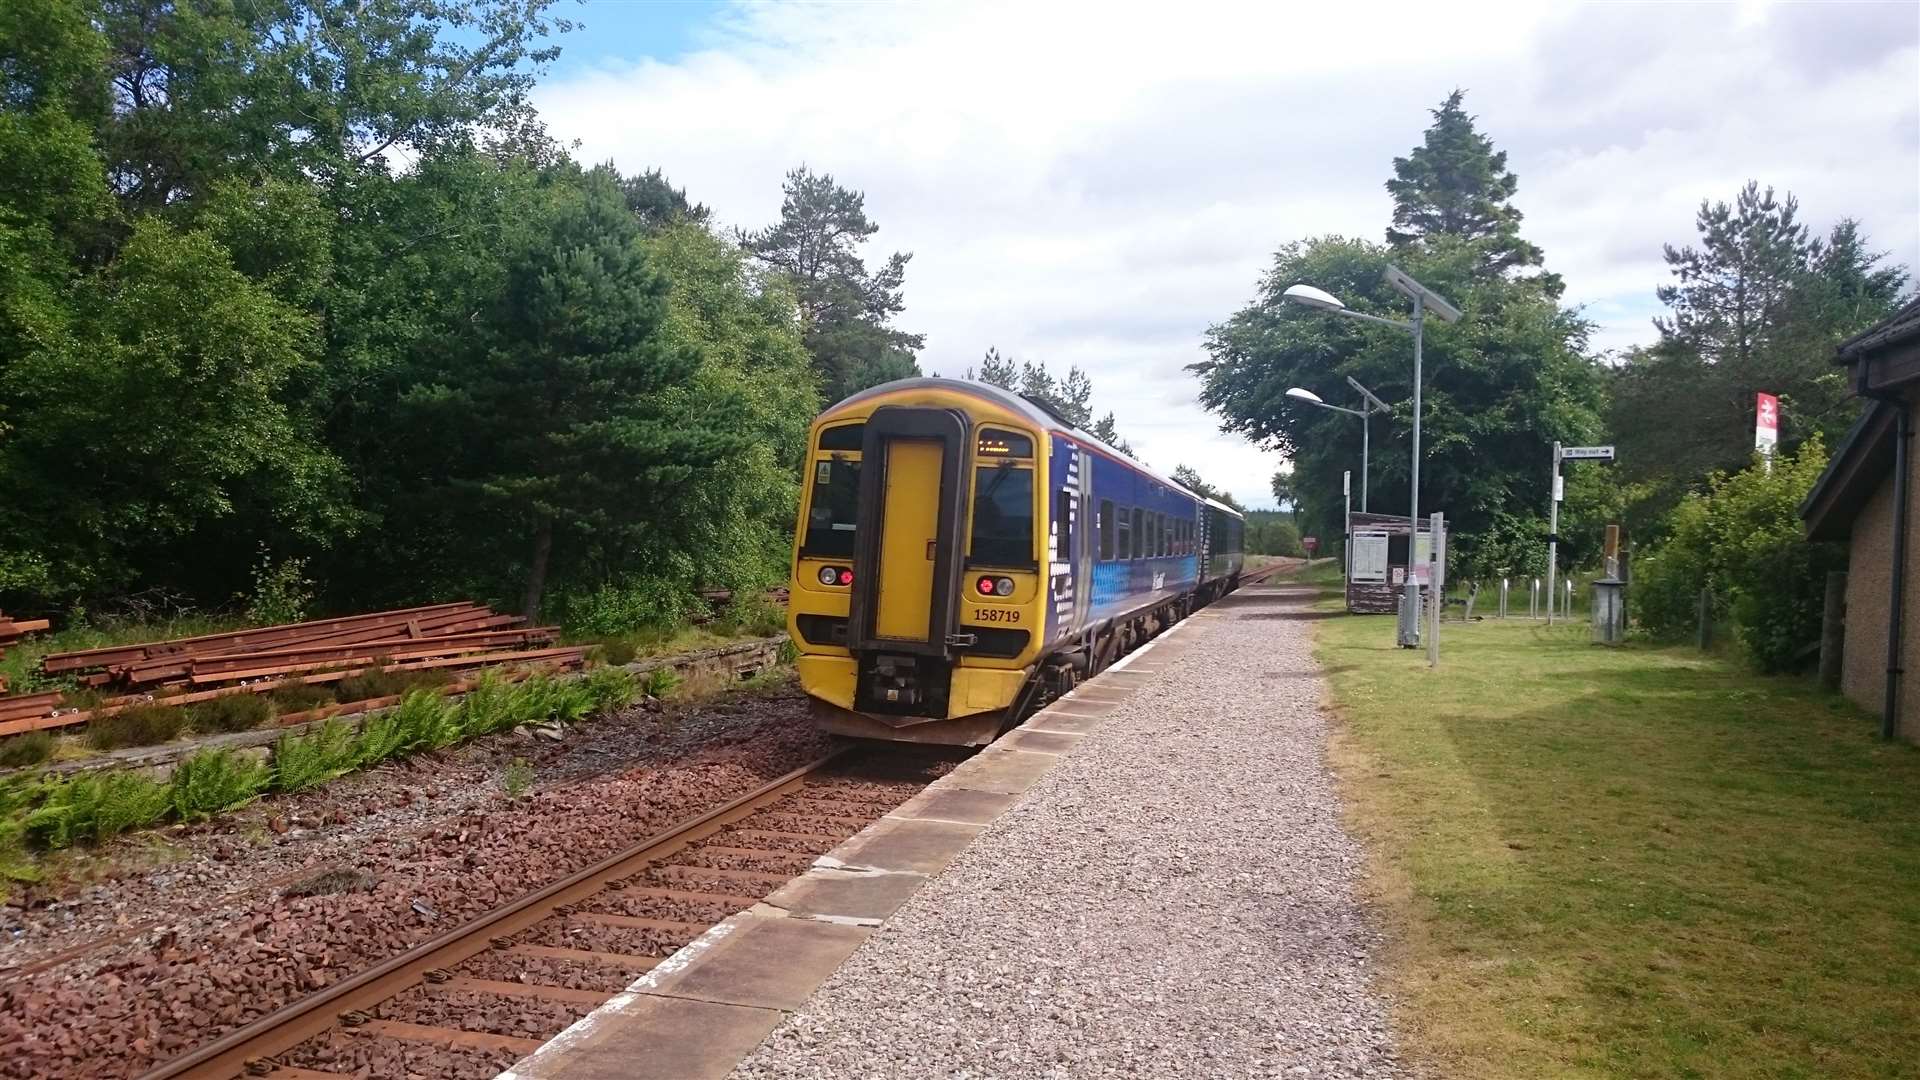 The alleged incidents are said to have occurred close to Altnabreac station, which is temporarily out of use due to access issues. Picture: HNM